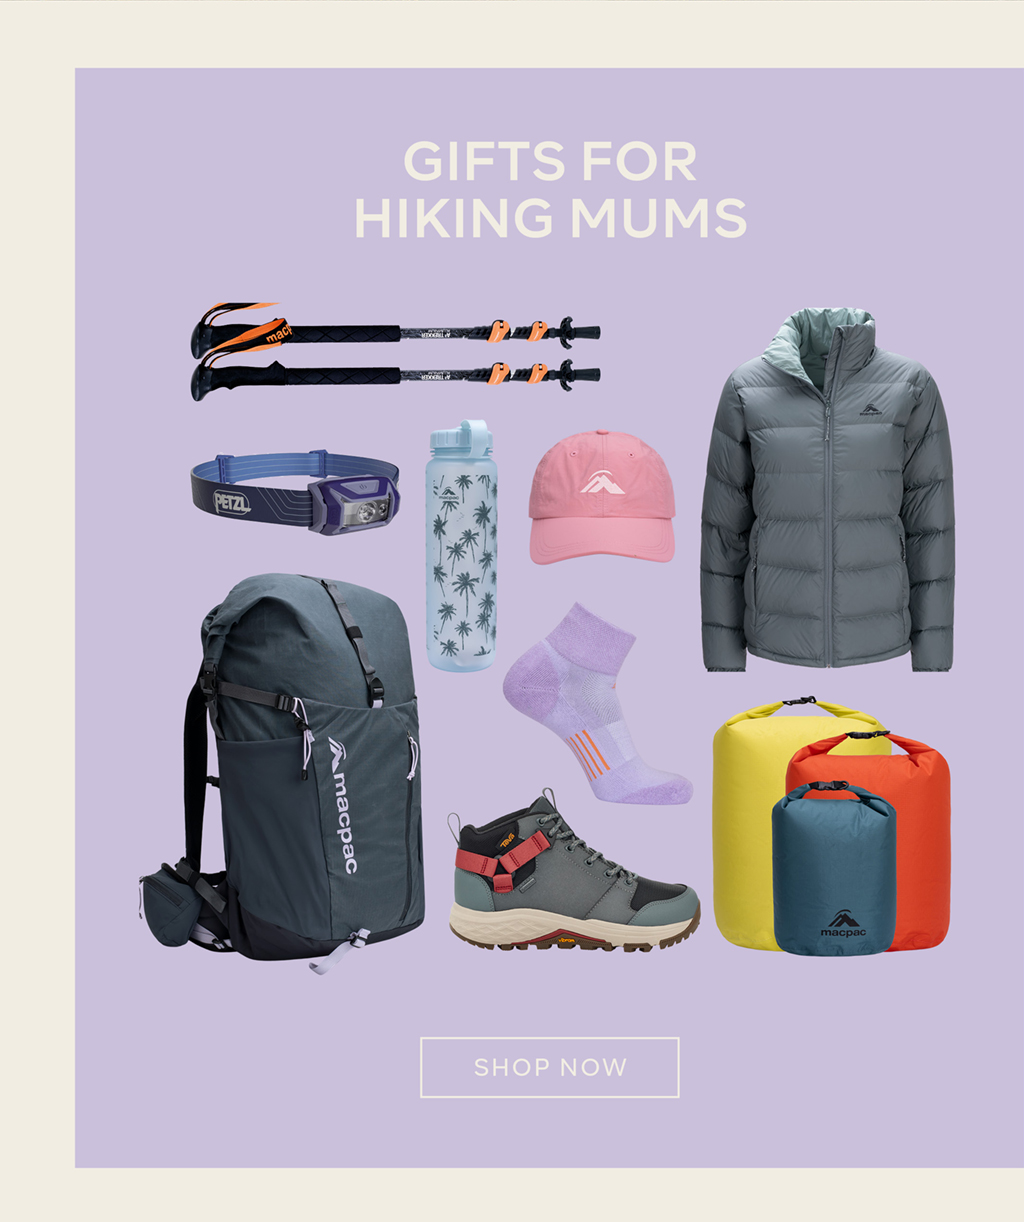 GIFTS FOR HIKING MUMS